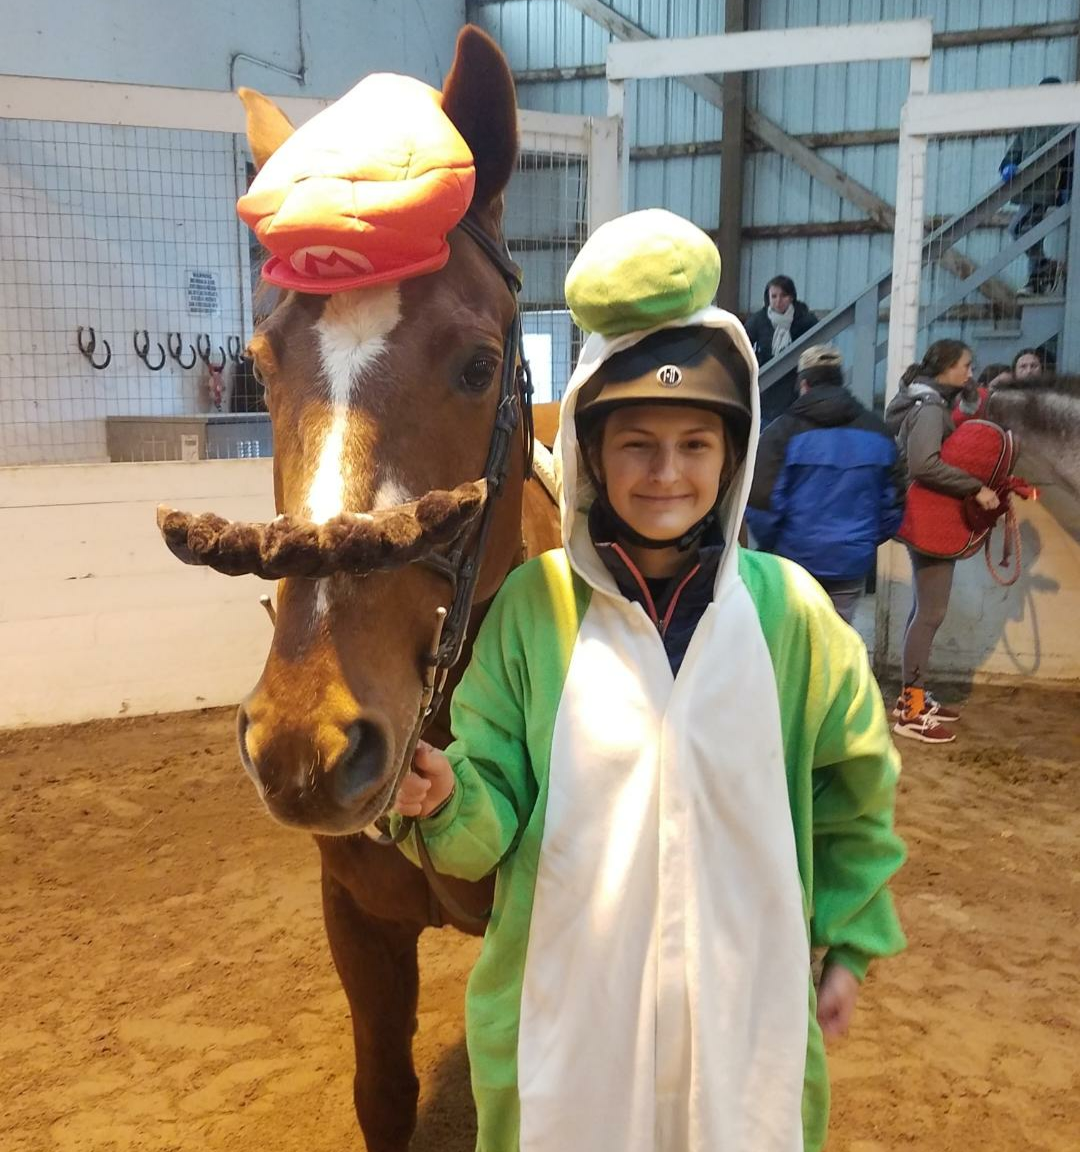 My horse and I dressed up as Mario and Luigi, which are some of my favorite comforting cartoon characters.